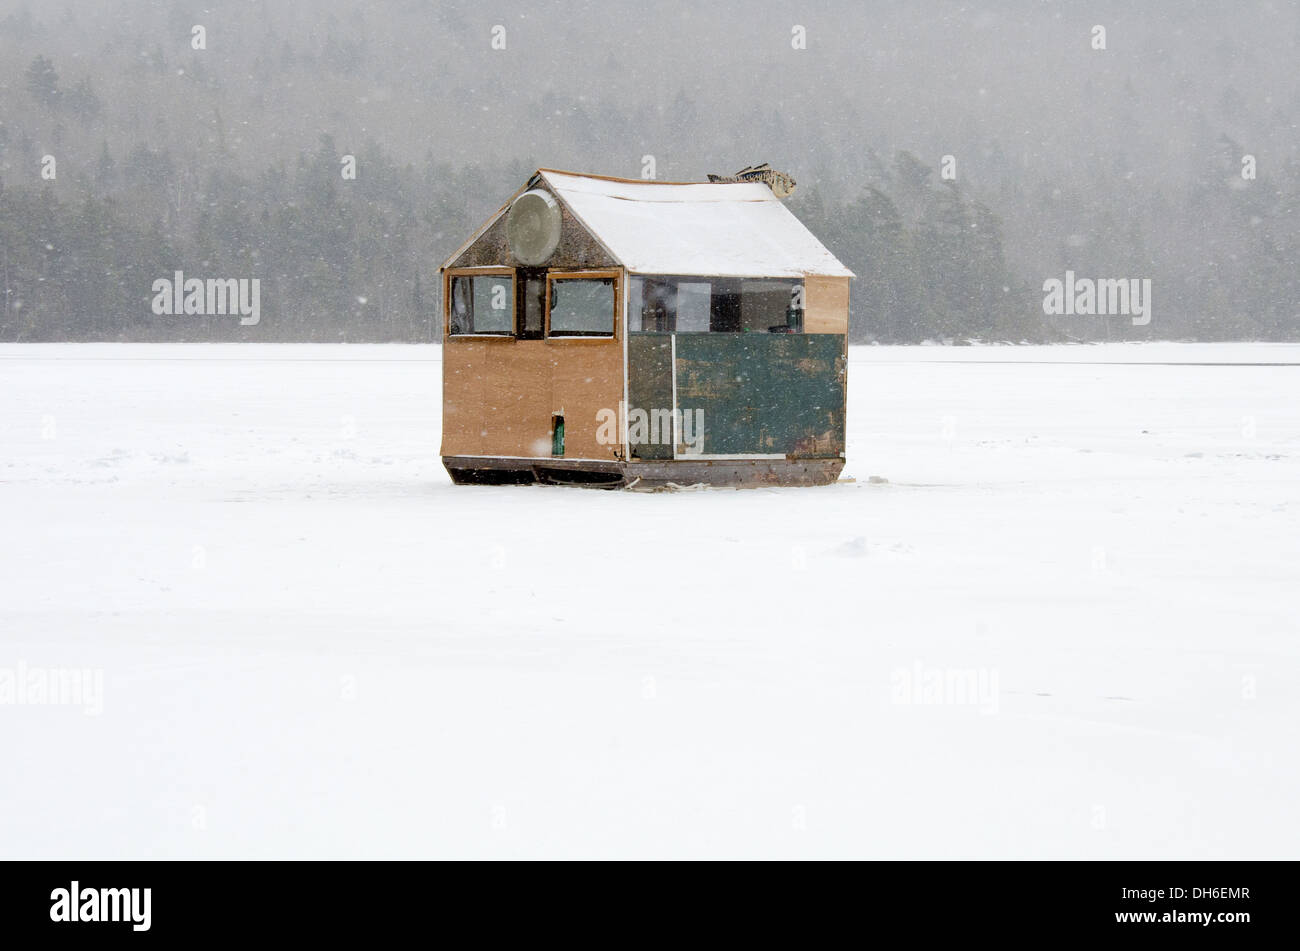 A large green ice fishing shack in a snowstorm. Stock Photo